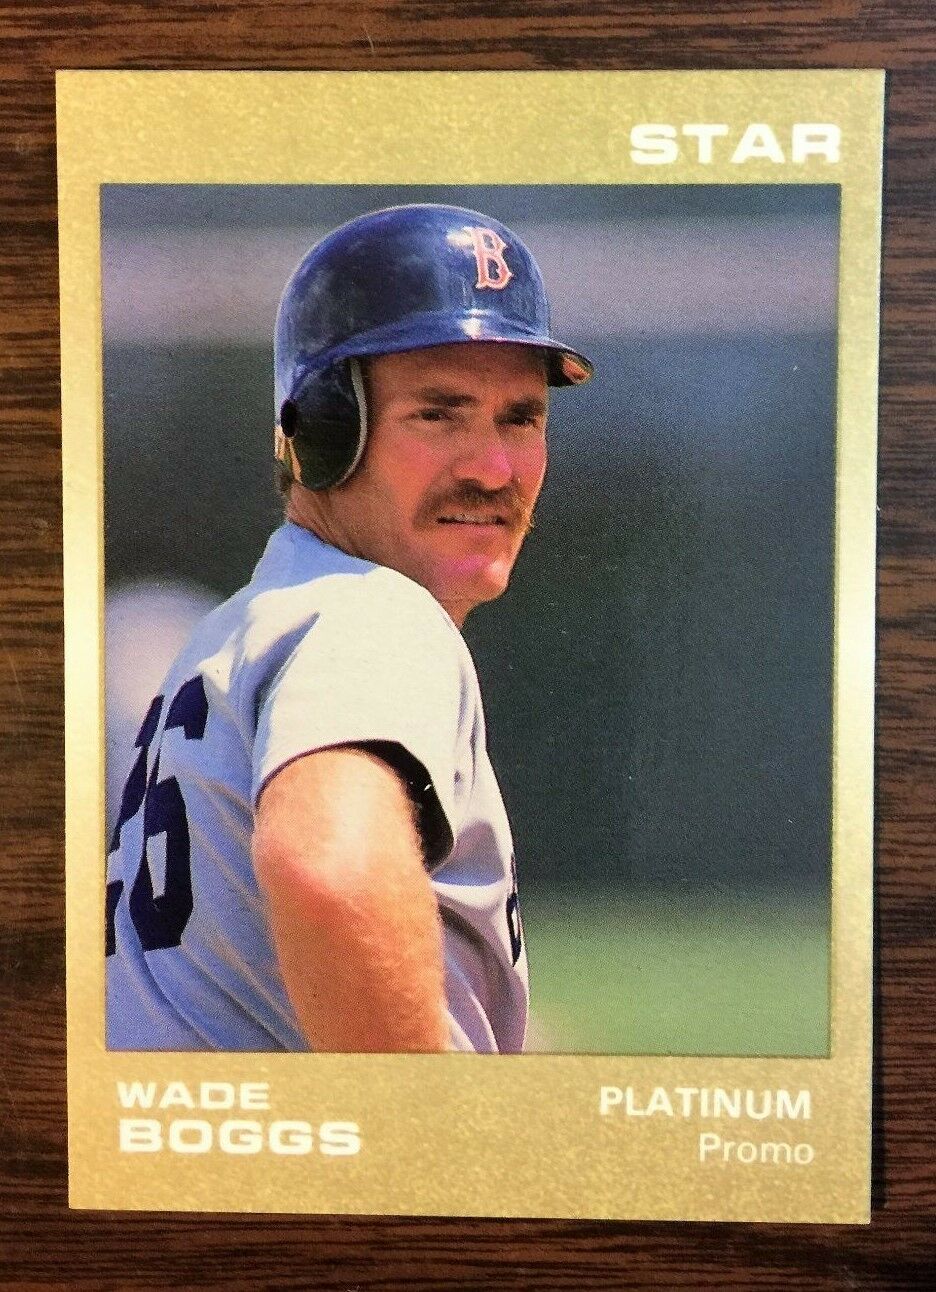 Wade Boggs 1988 Star Company Limited Edition PLATINUM Promo Card